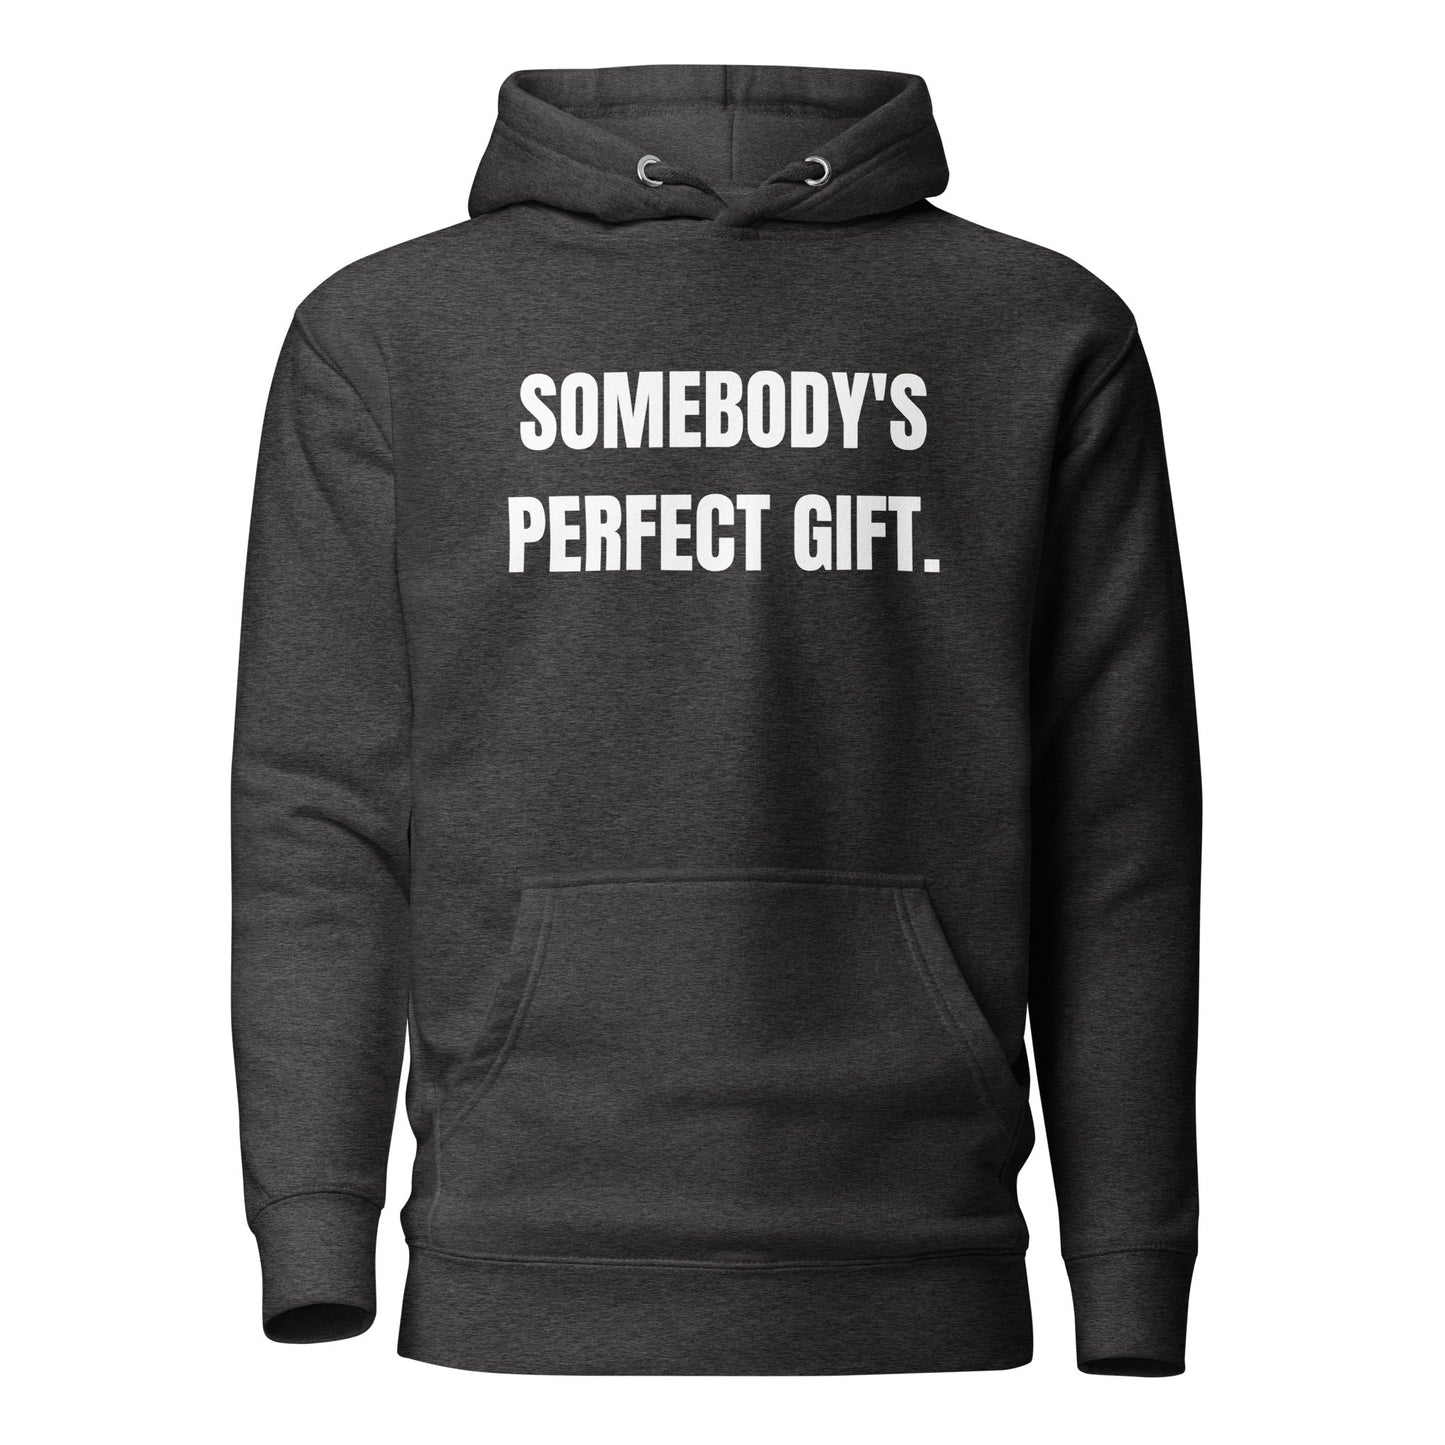 Somebody's perfect gift! Unisex Hoodie - Catch This Tea Shirts